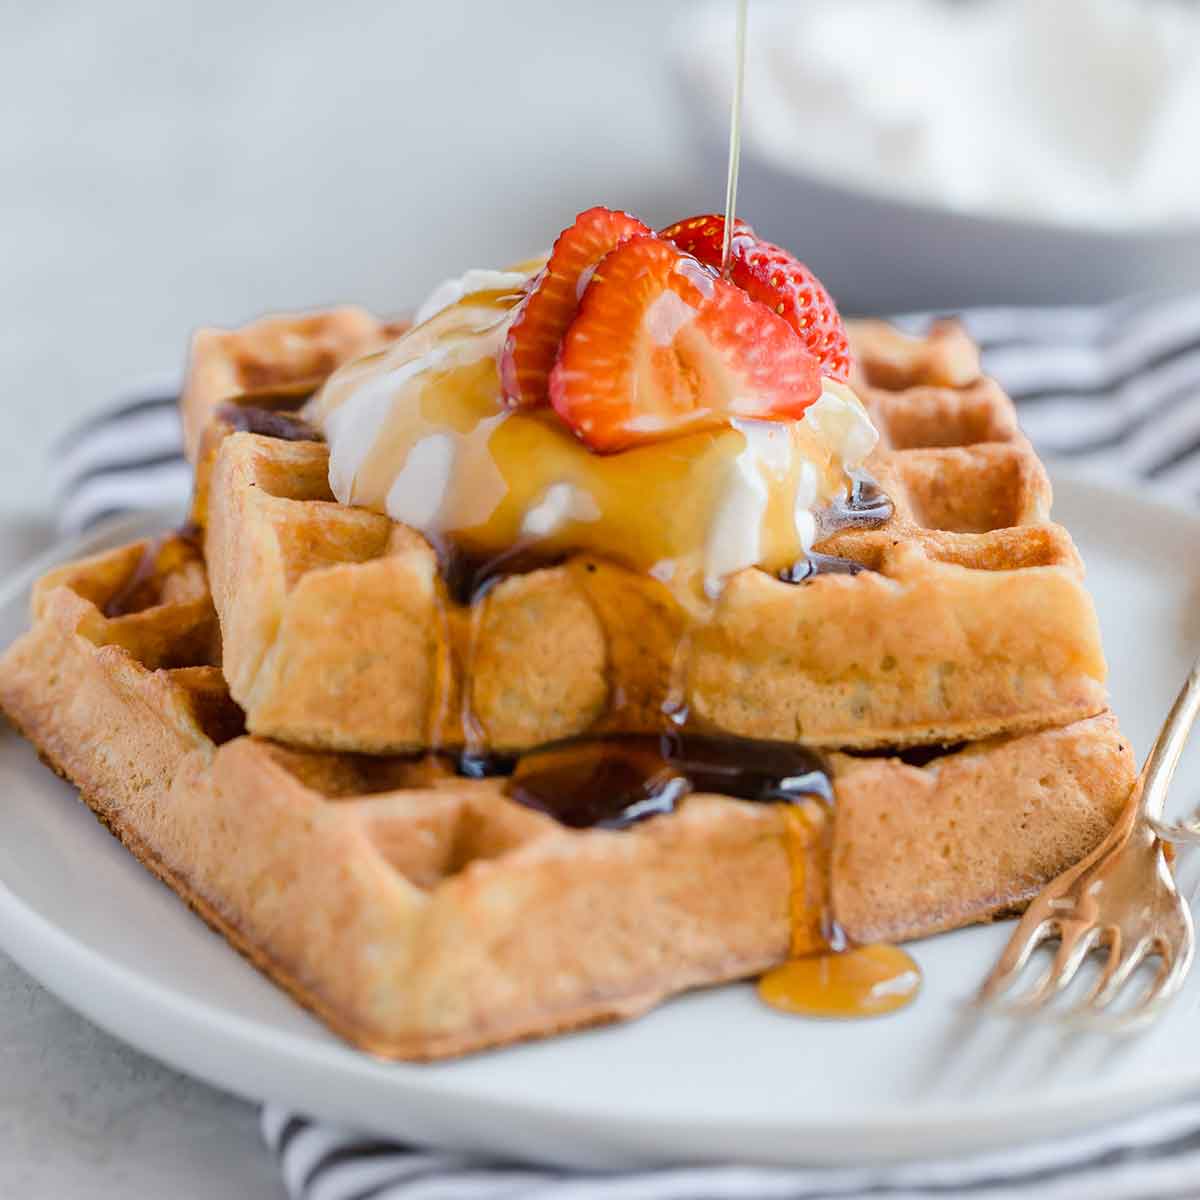 Two square waffles stacked with whipped cream and strawberries on top, with syrup being drizzled.